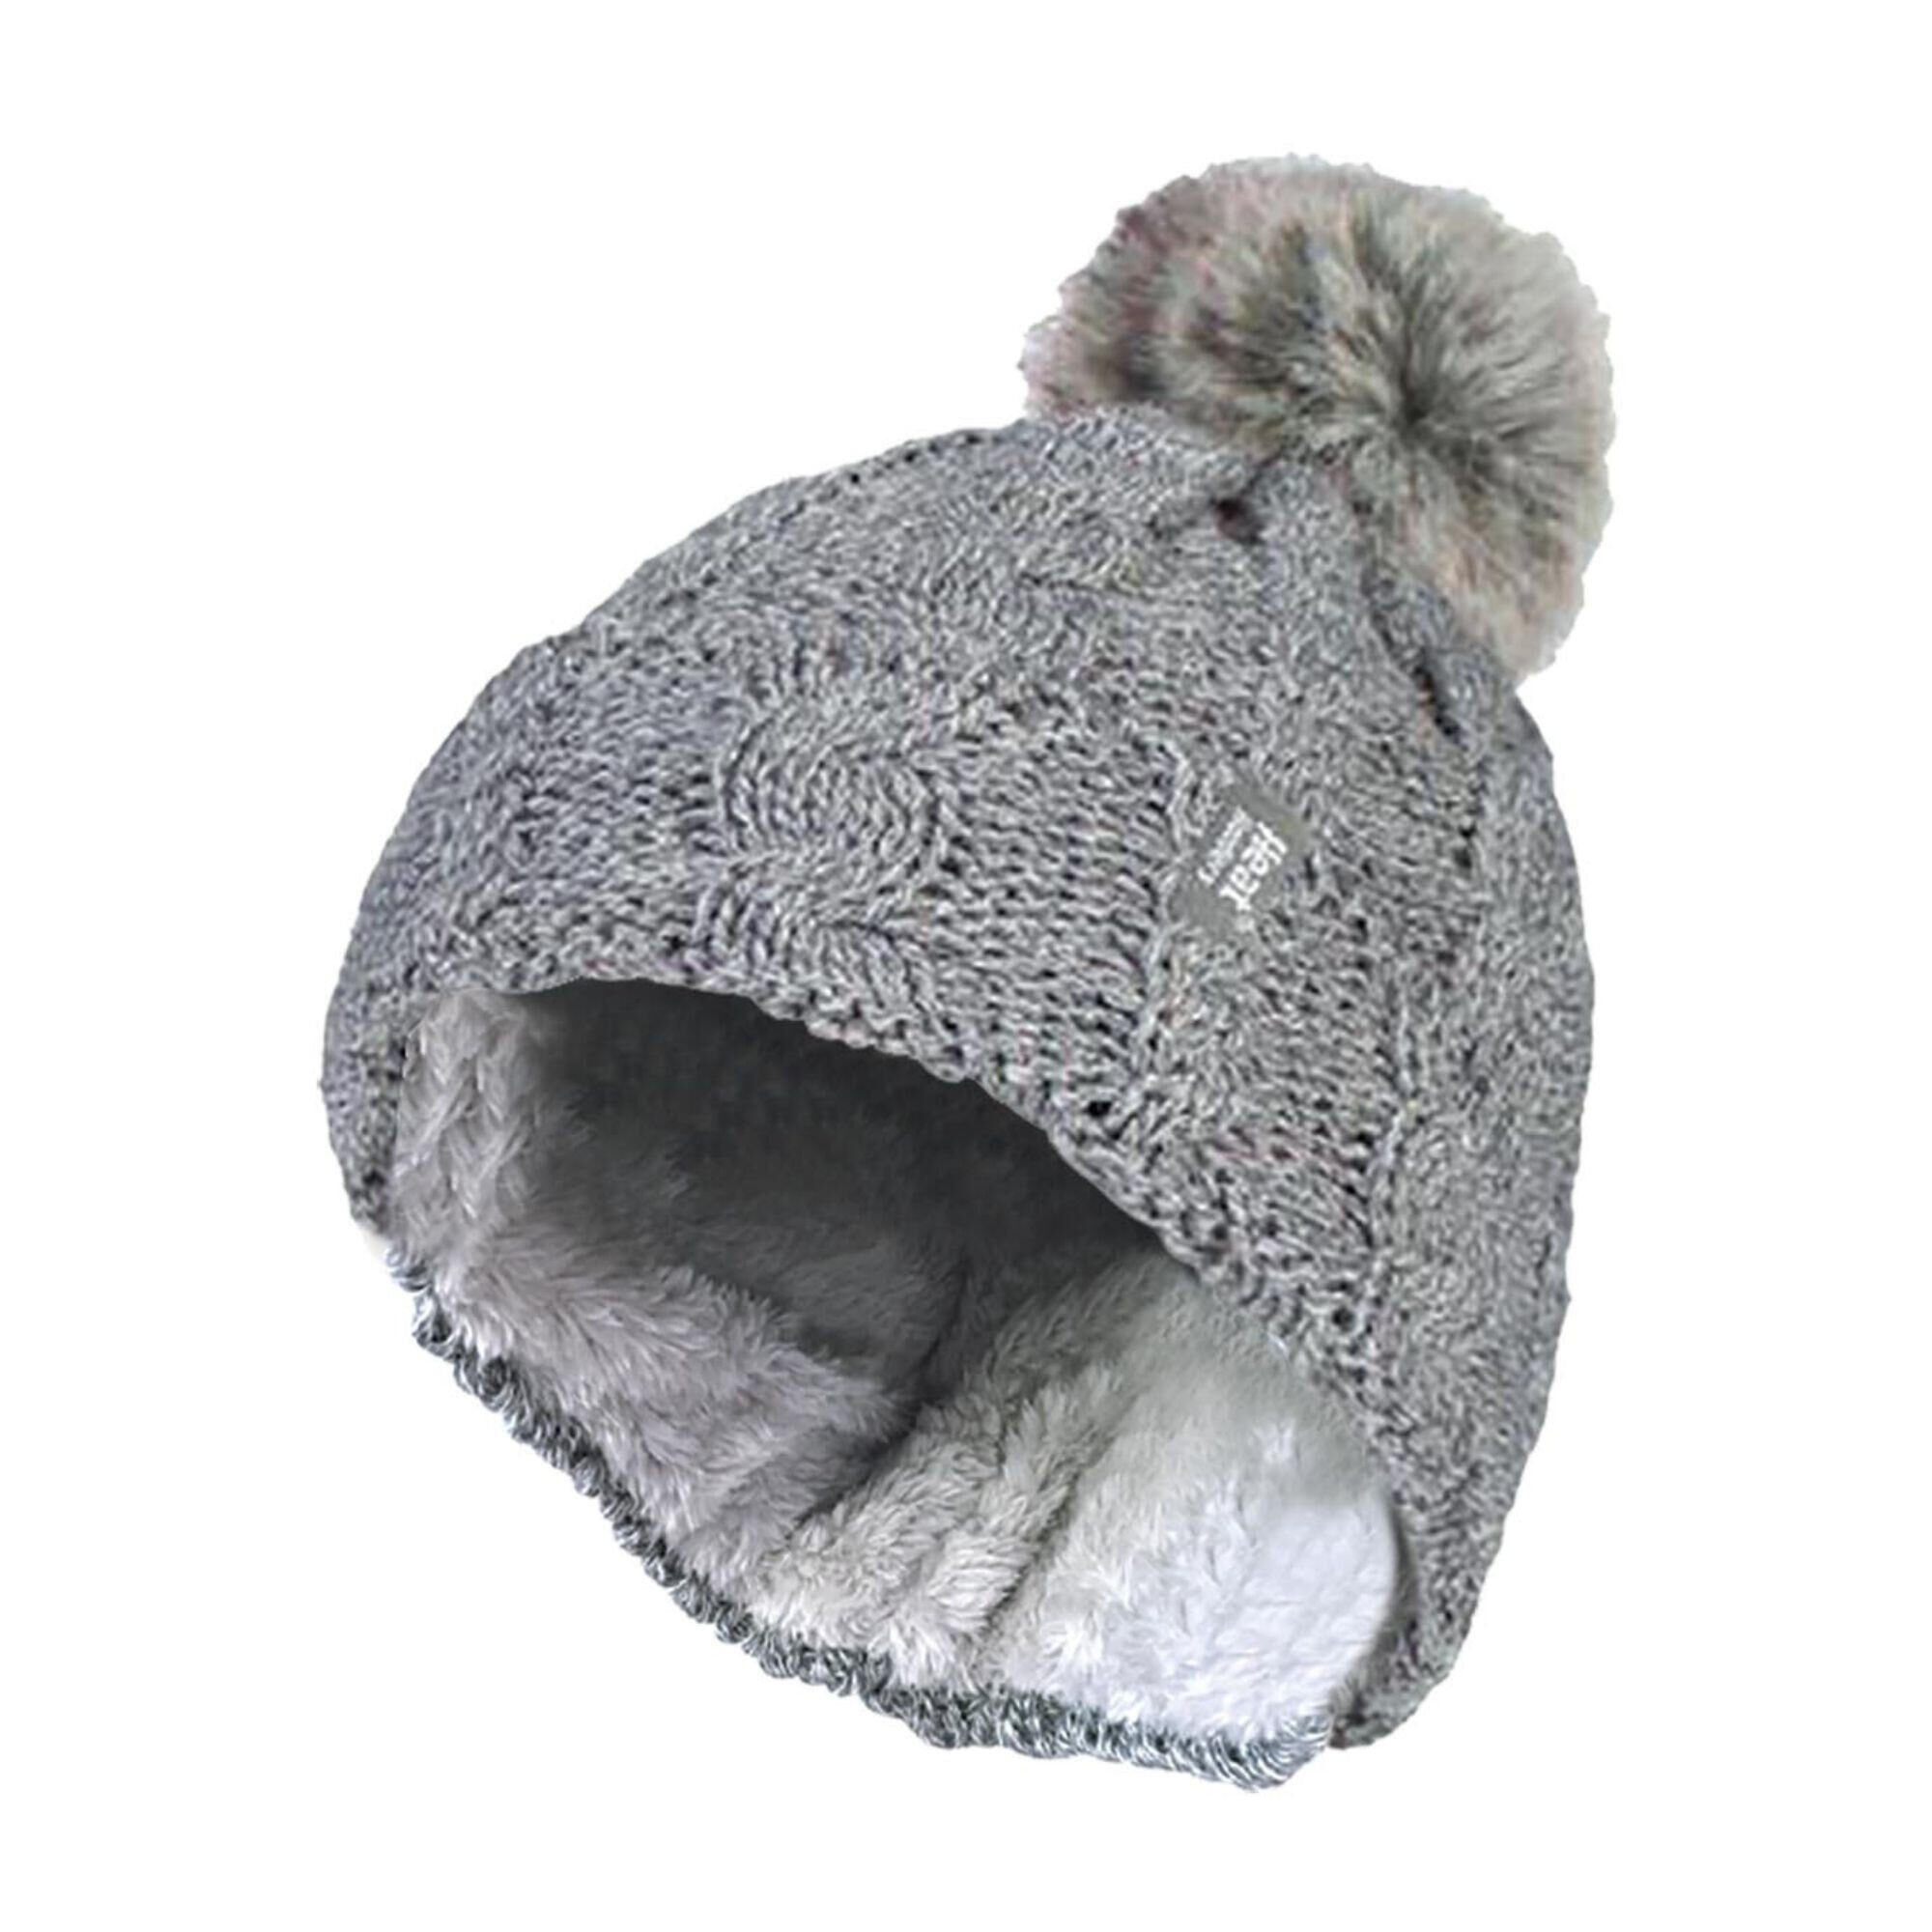 HEAT HOLDERS Ladies Knit Fleece Lined Thermal Bobble Hat with Pom Pom